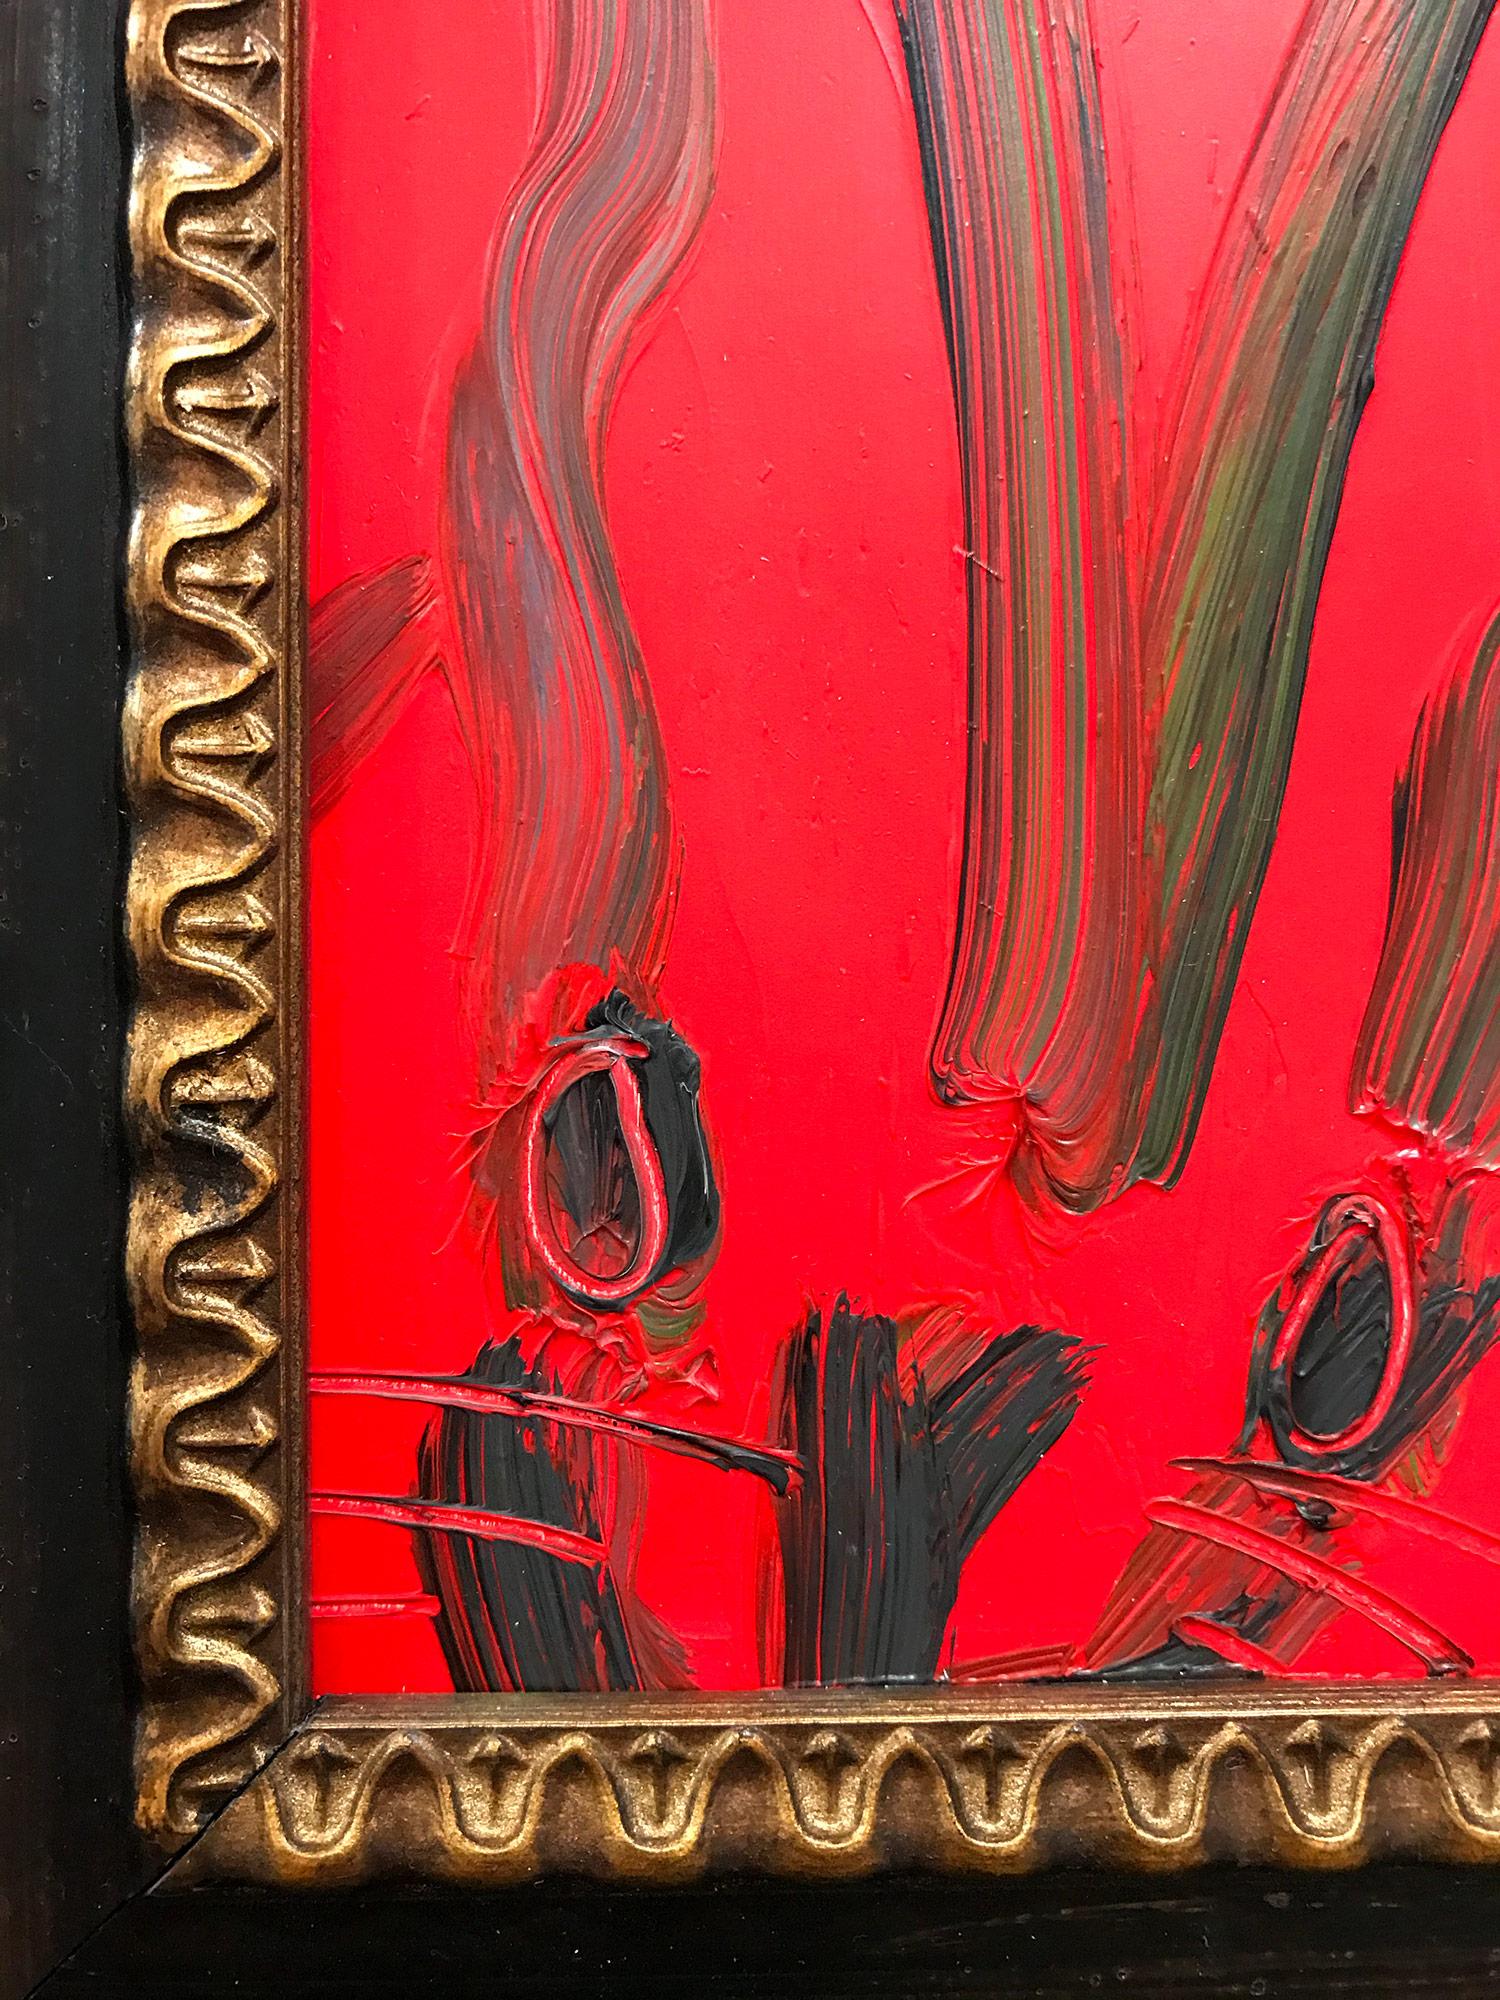 A wonderful composition of one of Slonem's most iconic subjects, Bunnies. This piece depicts a gestural figure of a black bunny on a Scarlet Red background with thick use of paint. It is housed in a wonderful Gothic style frame. Inspired by nature